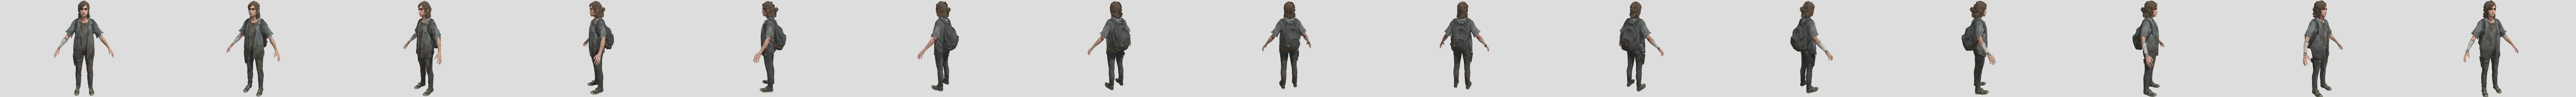 The Regressor, Low Poly Ellie from the Last of Us Part ll Model